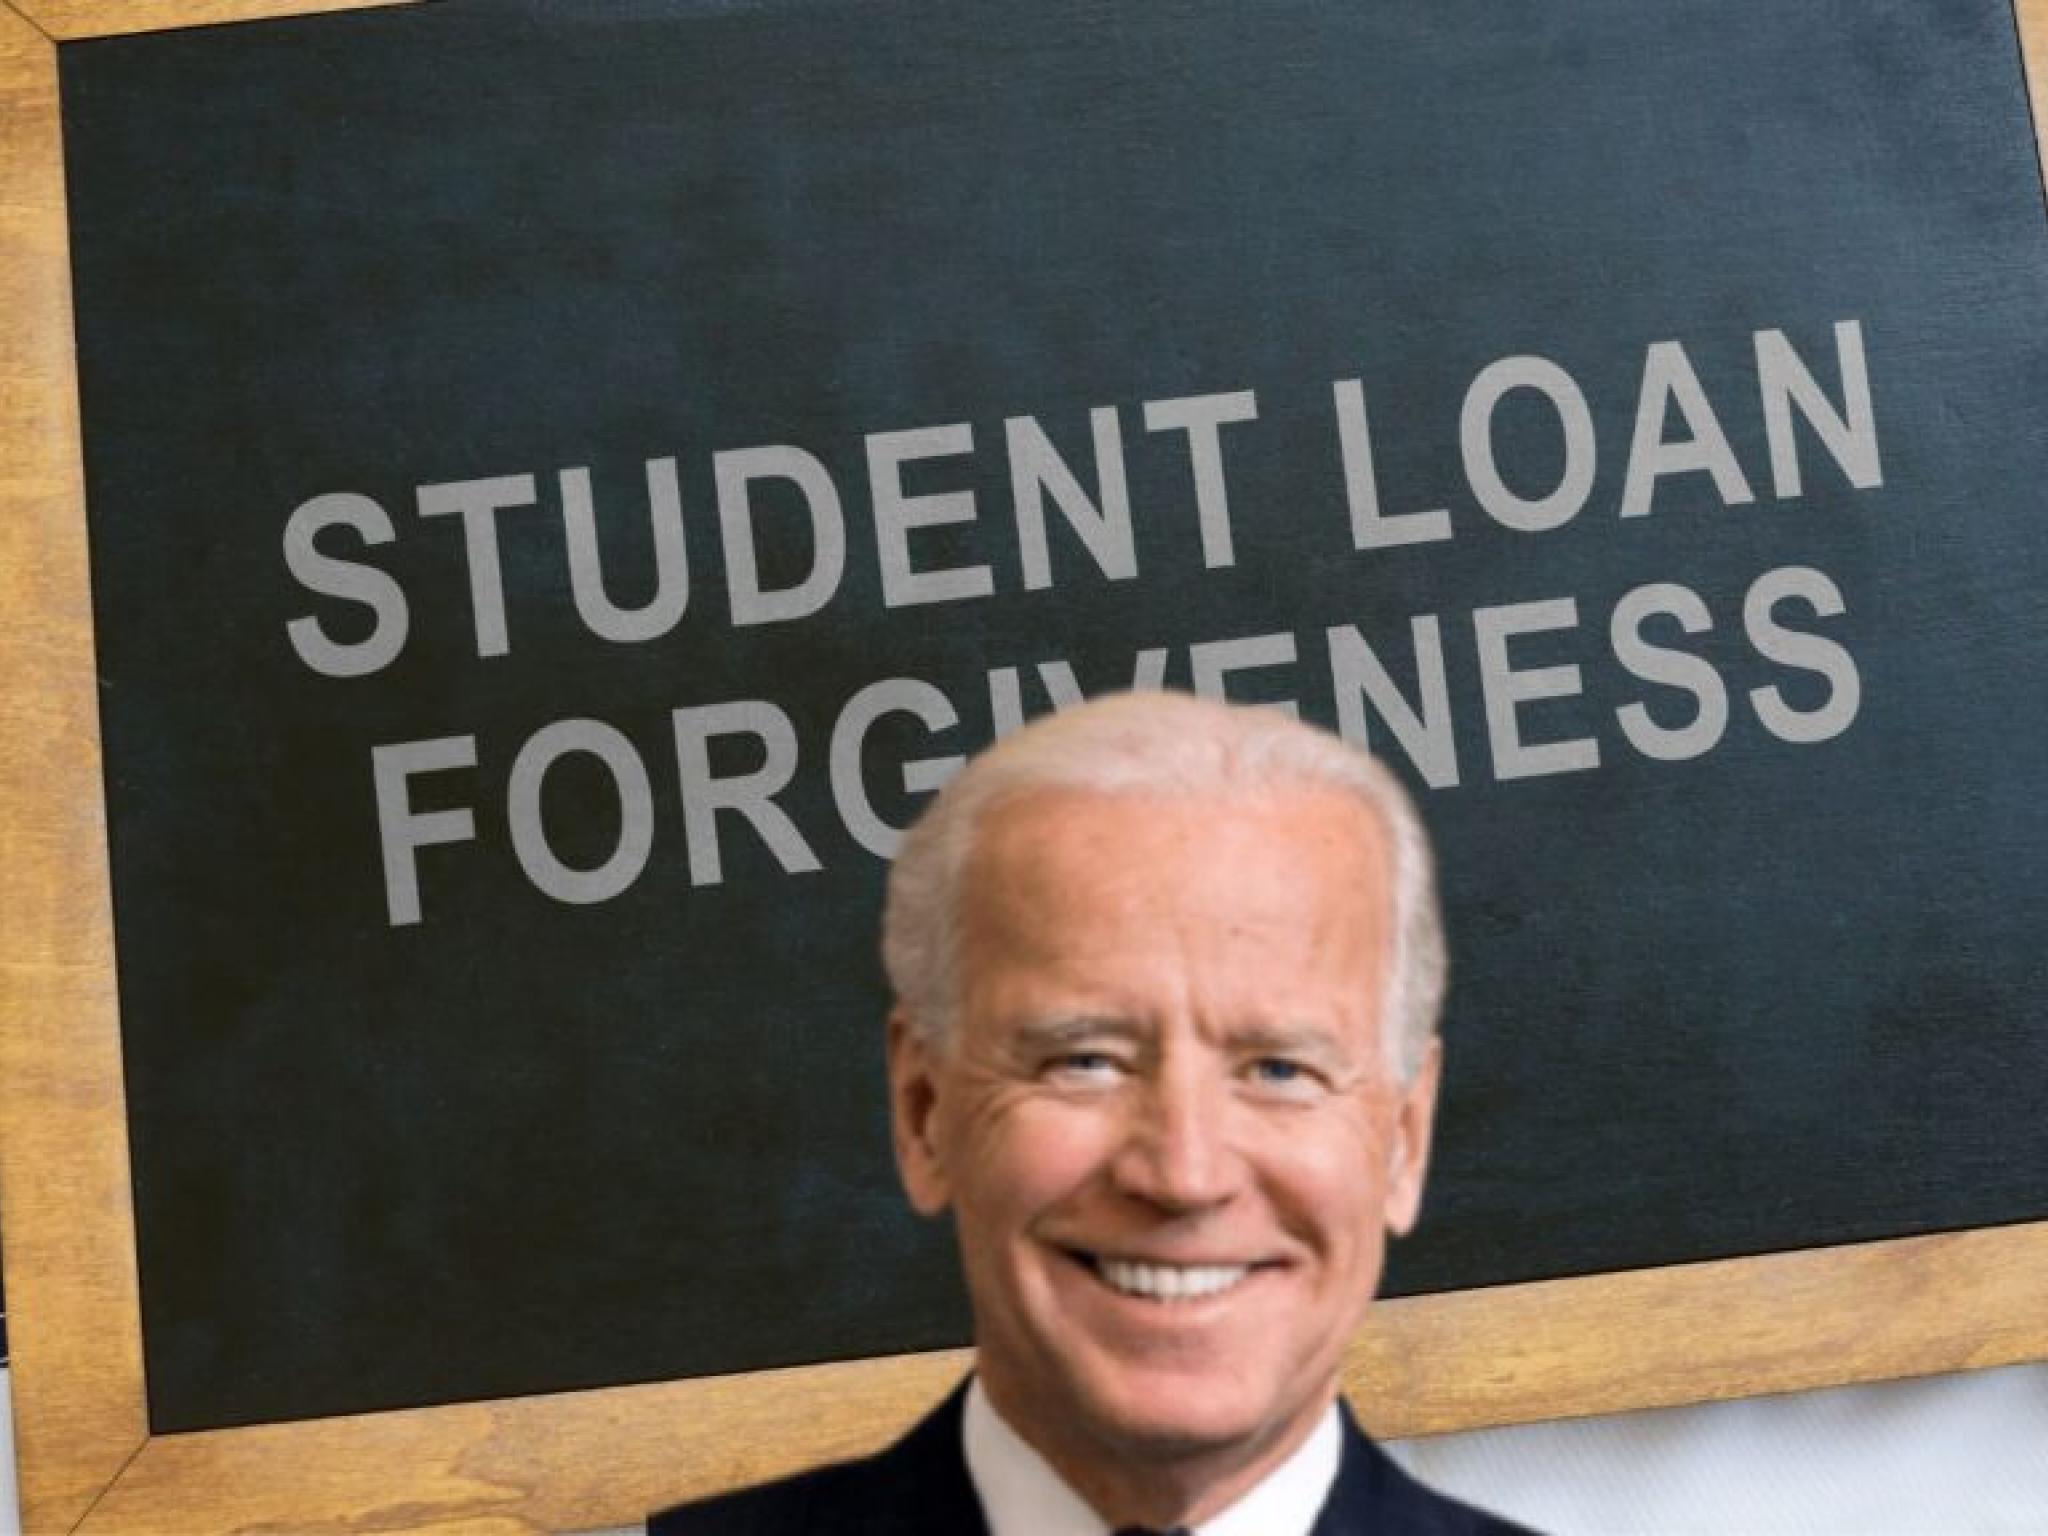  biden-wipes-more-than-7m-in-student-debt-for-277k-borrowers-too-many-people-feel-the-strain-and-stress 